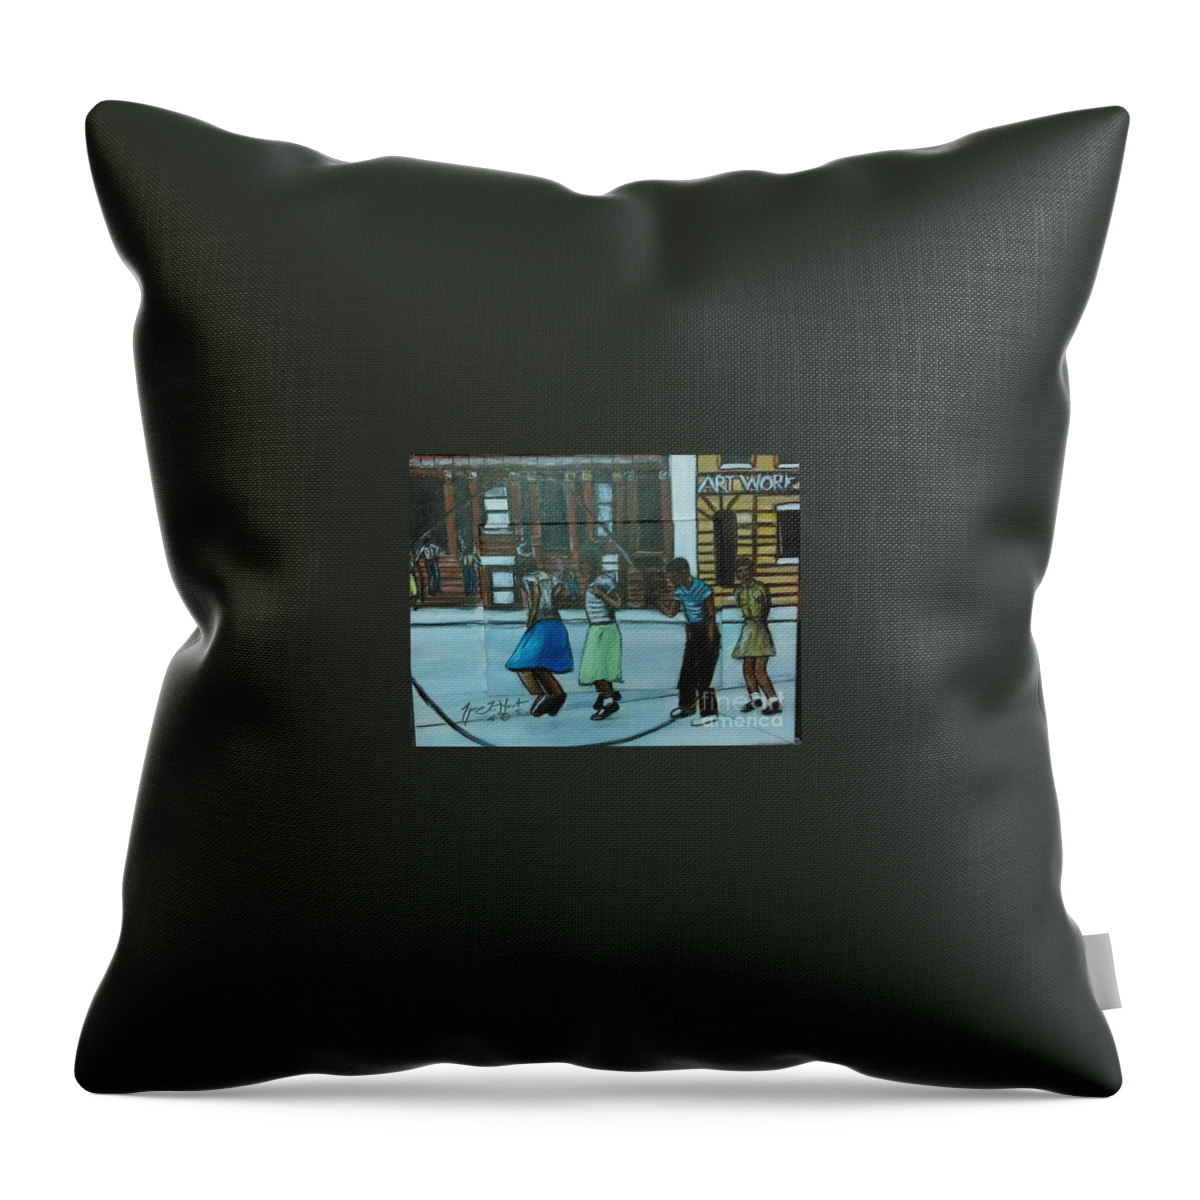 Urban Outfitters You Know Throw Pillow featuring the painting Double Dutch Urban Games by Tyrone Hart